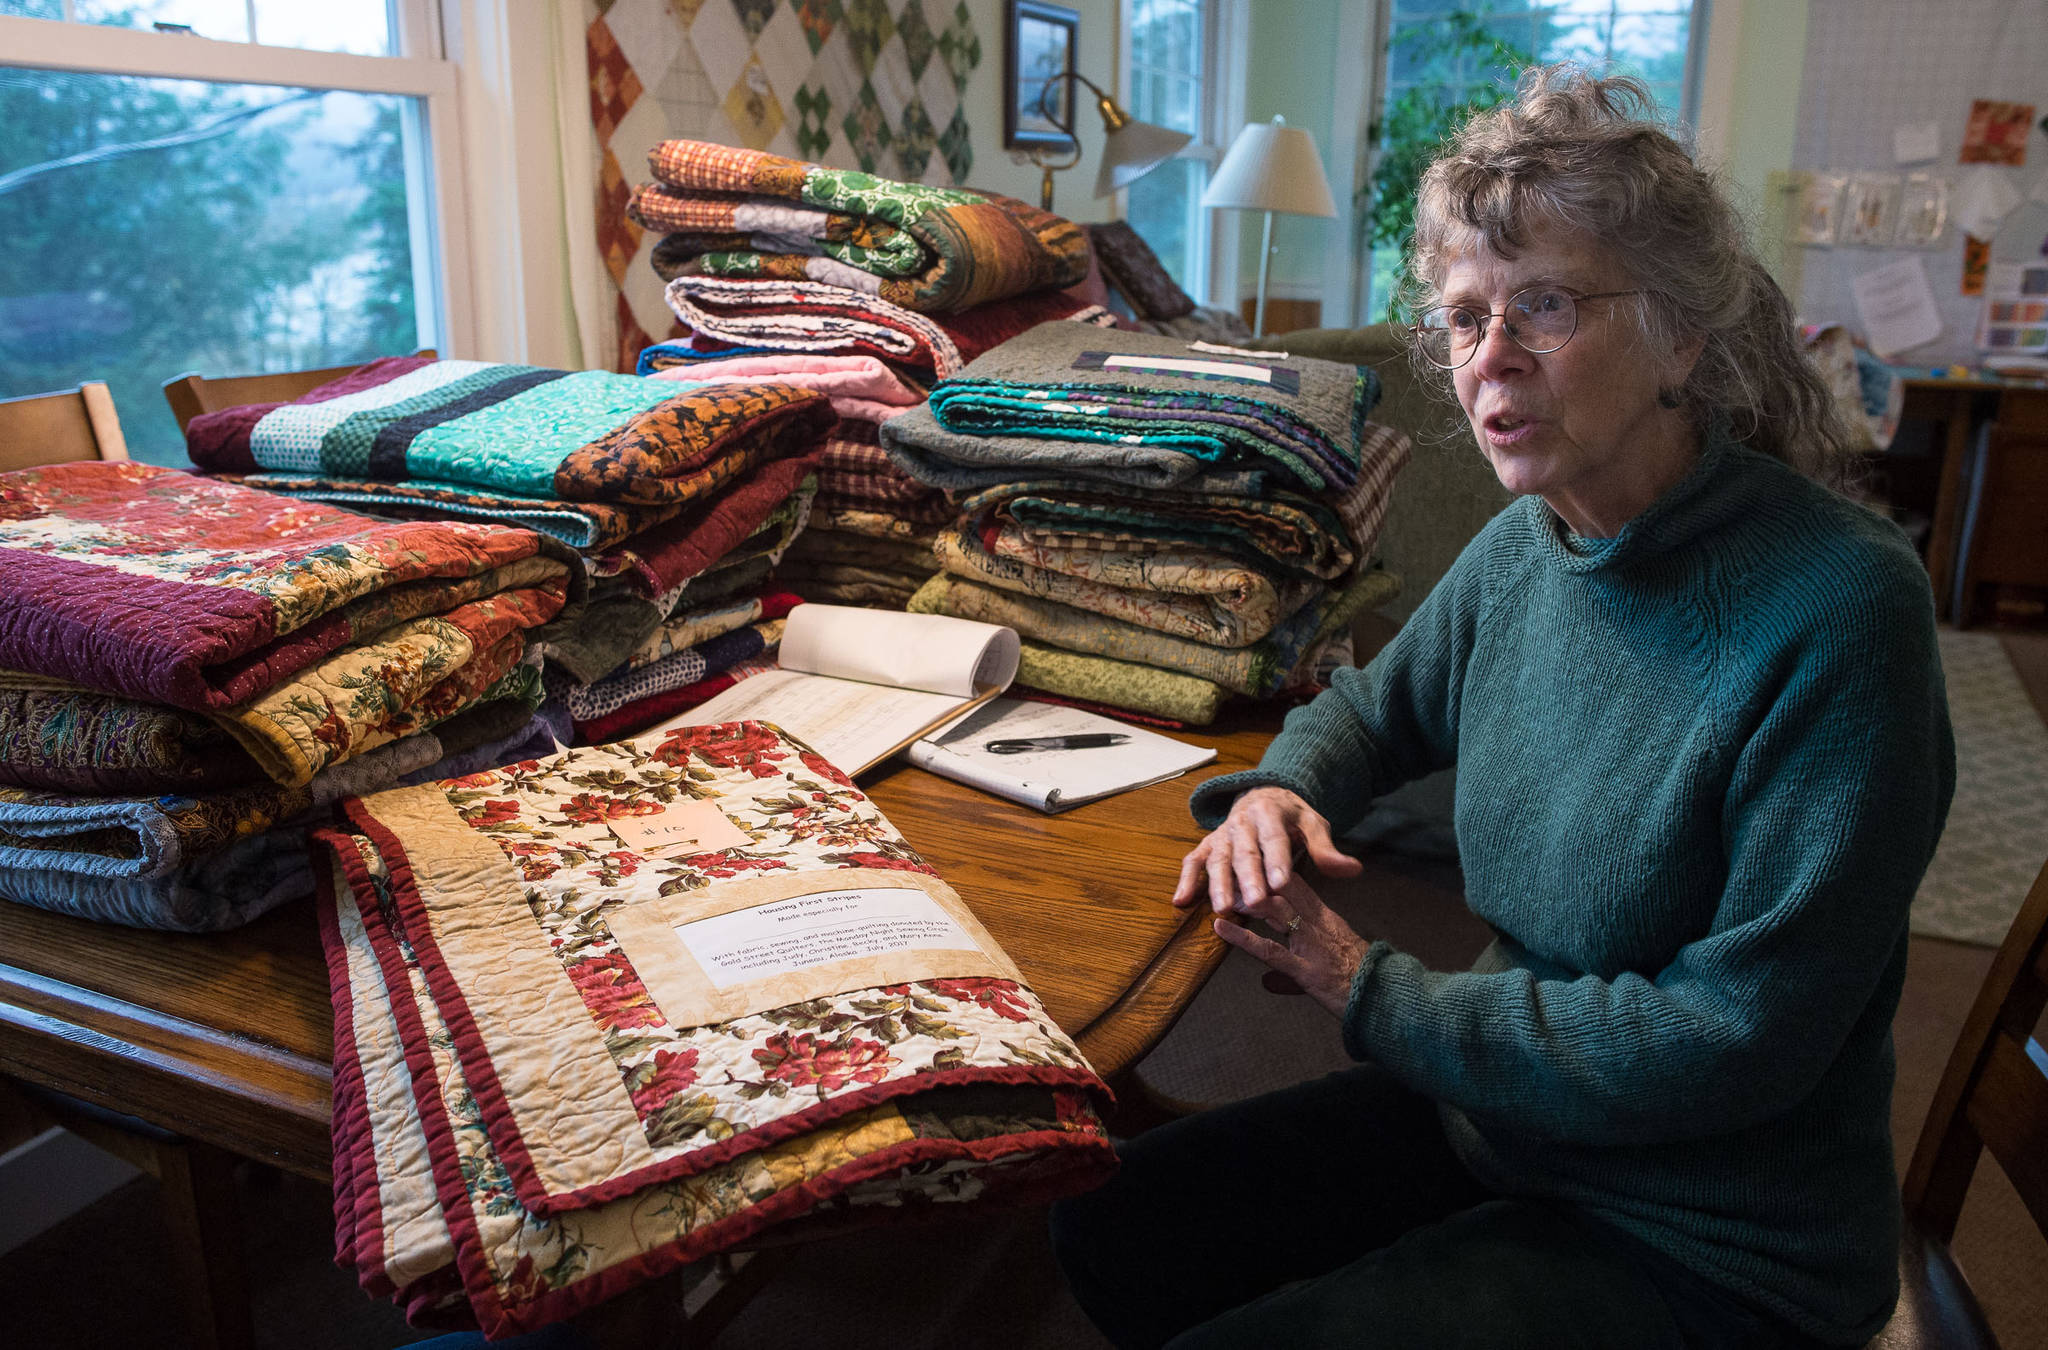 Odette Edgar talks about the handmade quilts she helped make and organize for the Housing First residents at her house on Tuesday, Sept. 26, 2017. (Michael Penn | Juneau Empire)